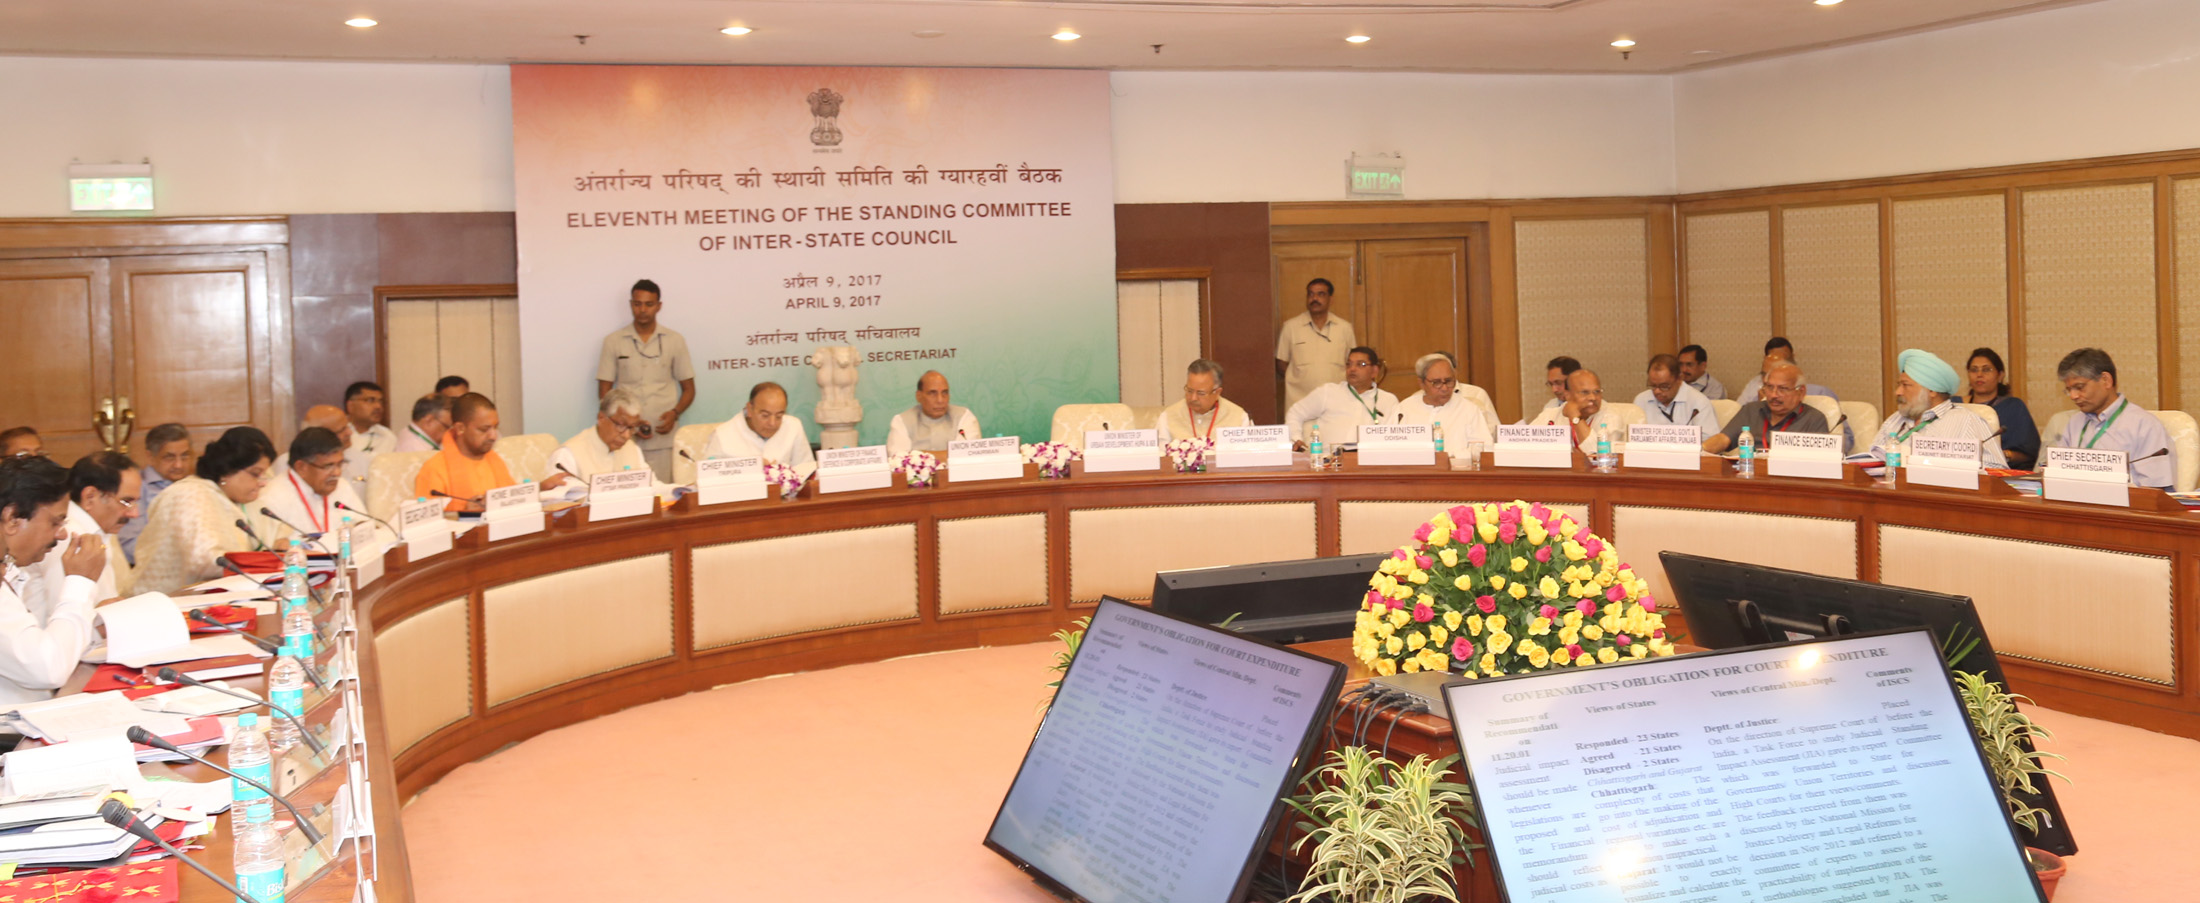 The Union Home Minister, Shri Rajnath Singh chairing the 11th Standing Committee meeting of the Inter-State Council, in New Delhi on April 09, 2017. 	The Union Minister for Finance, Corporate Affairs and Defence, Shri Arun Jaitley, the Chief Minister of Chhattisgarh, Dr. Raman Singh, the Chief Minister of Tripura, Shri Manik Sarkar, the Chief Minister of Odisha, Shri Naveen Patnaik, the Chief Minister of Uttar Pradesh, Yogi Adityanath and other dignitaries are also seen.